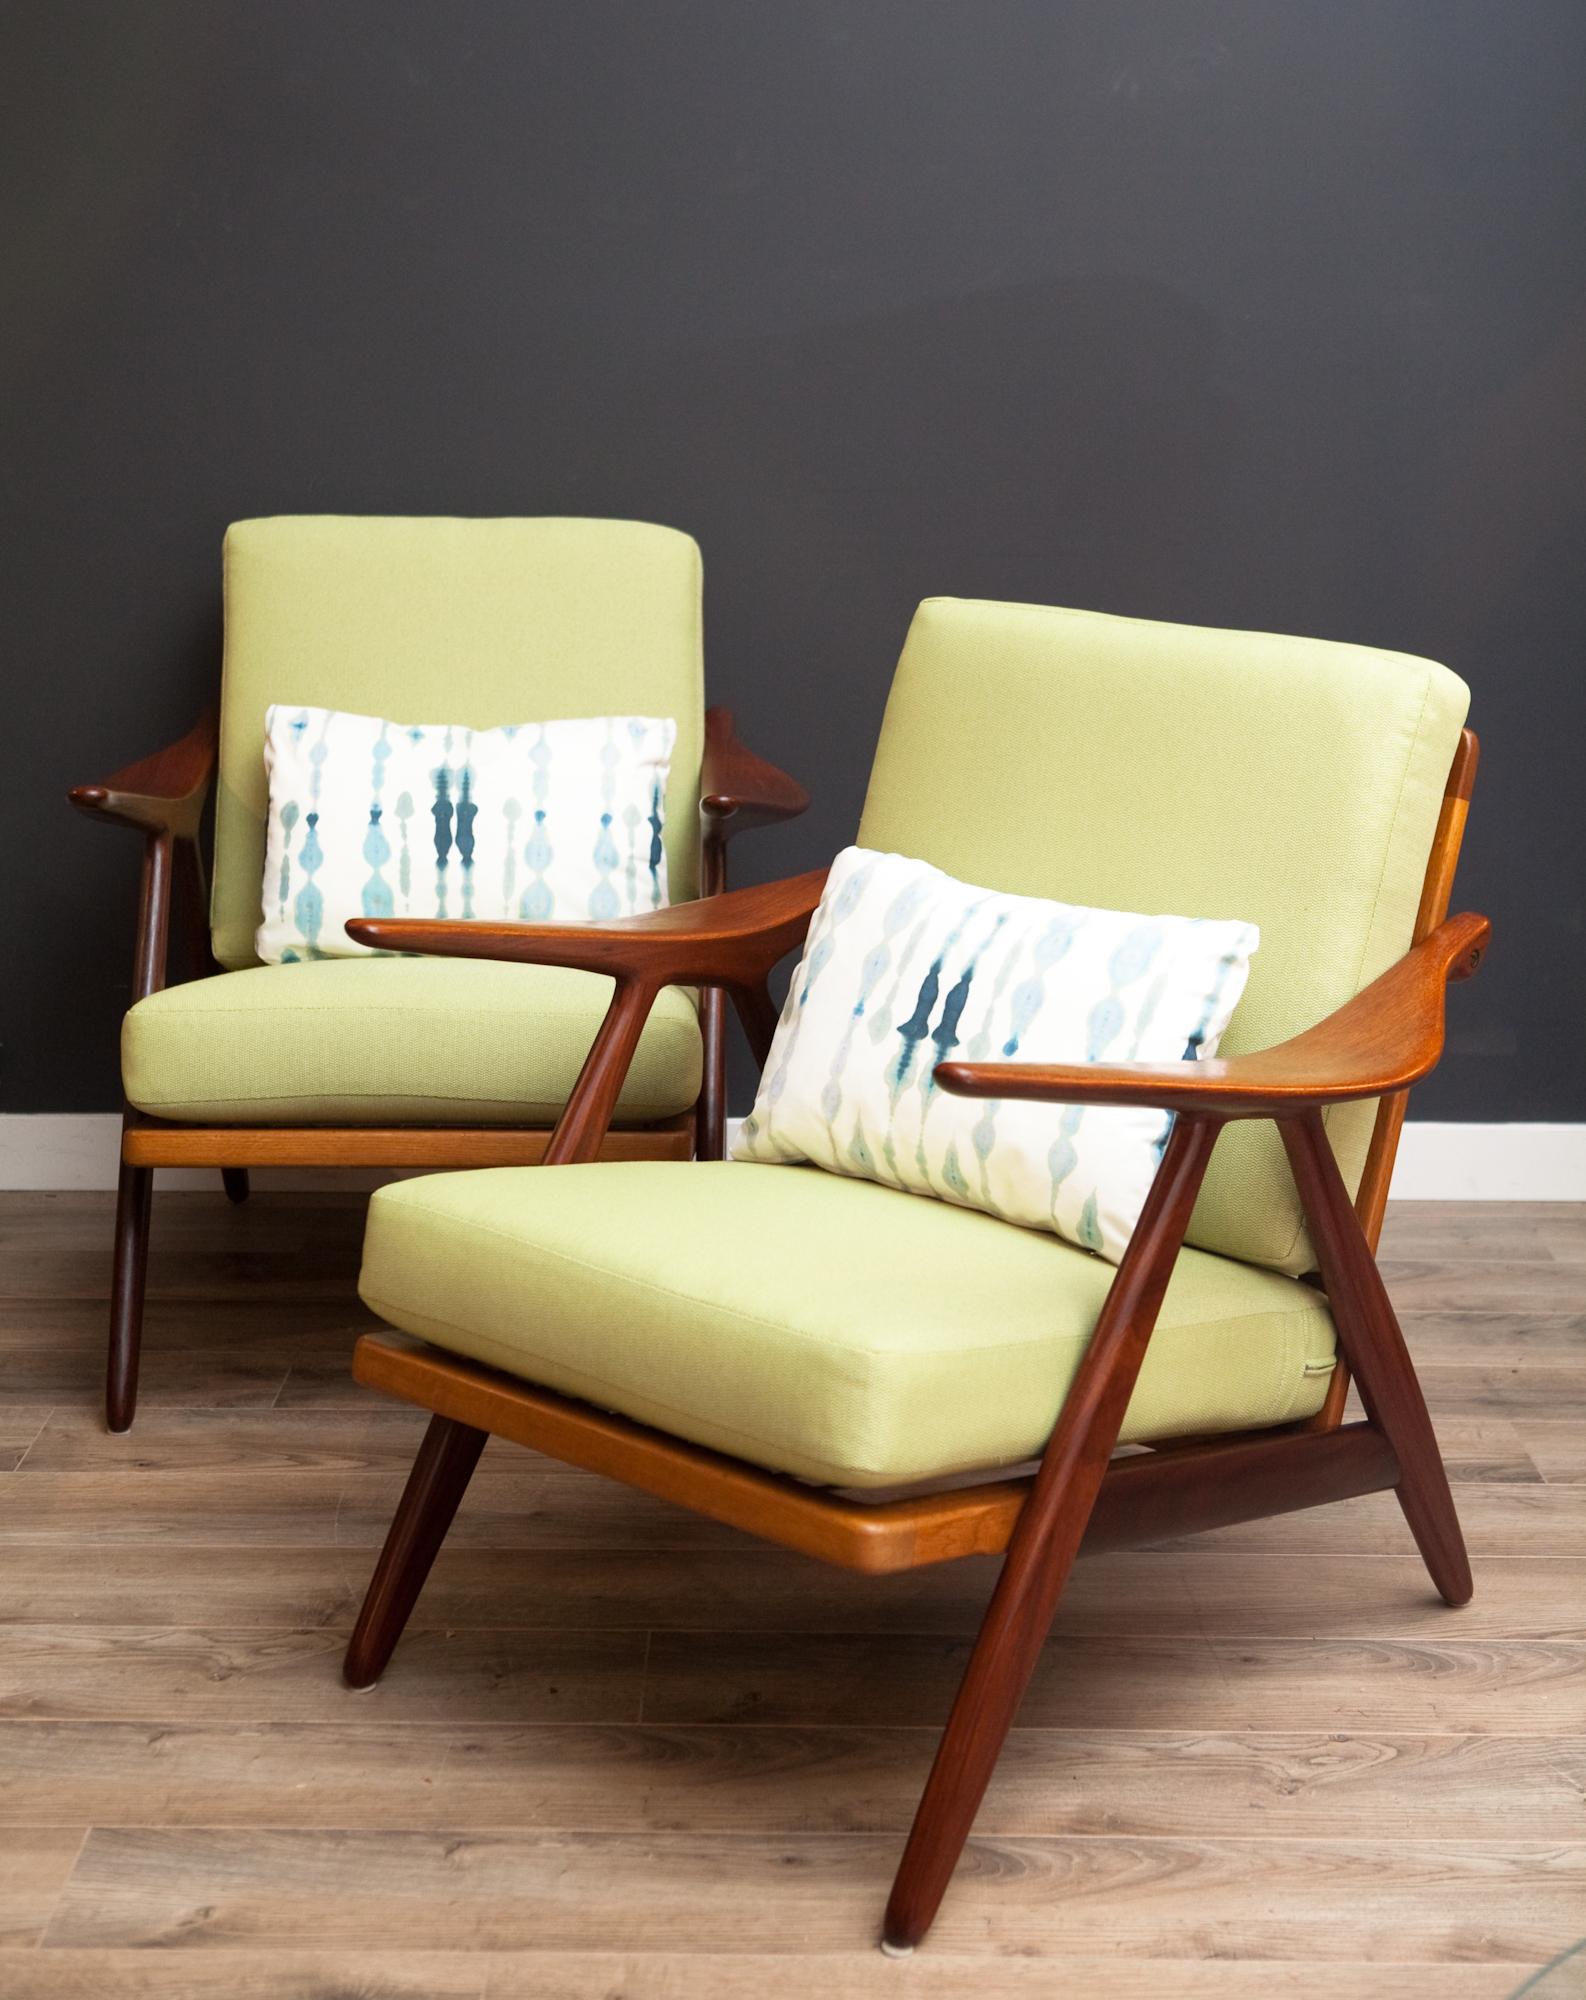 If you are a Danish modern aficionado, a lover of exceptionally good design, or a collector of all things modernist, then these are the pieces for you! Very rare pair of chairs and exceptionally rare matching sofa by Danish furniture design icon,